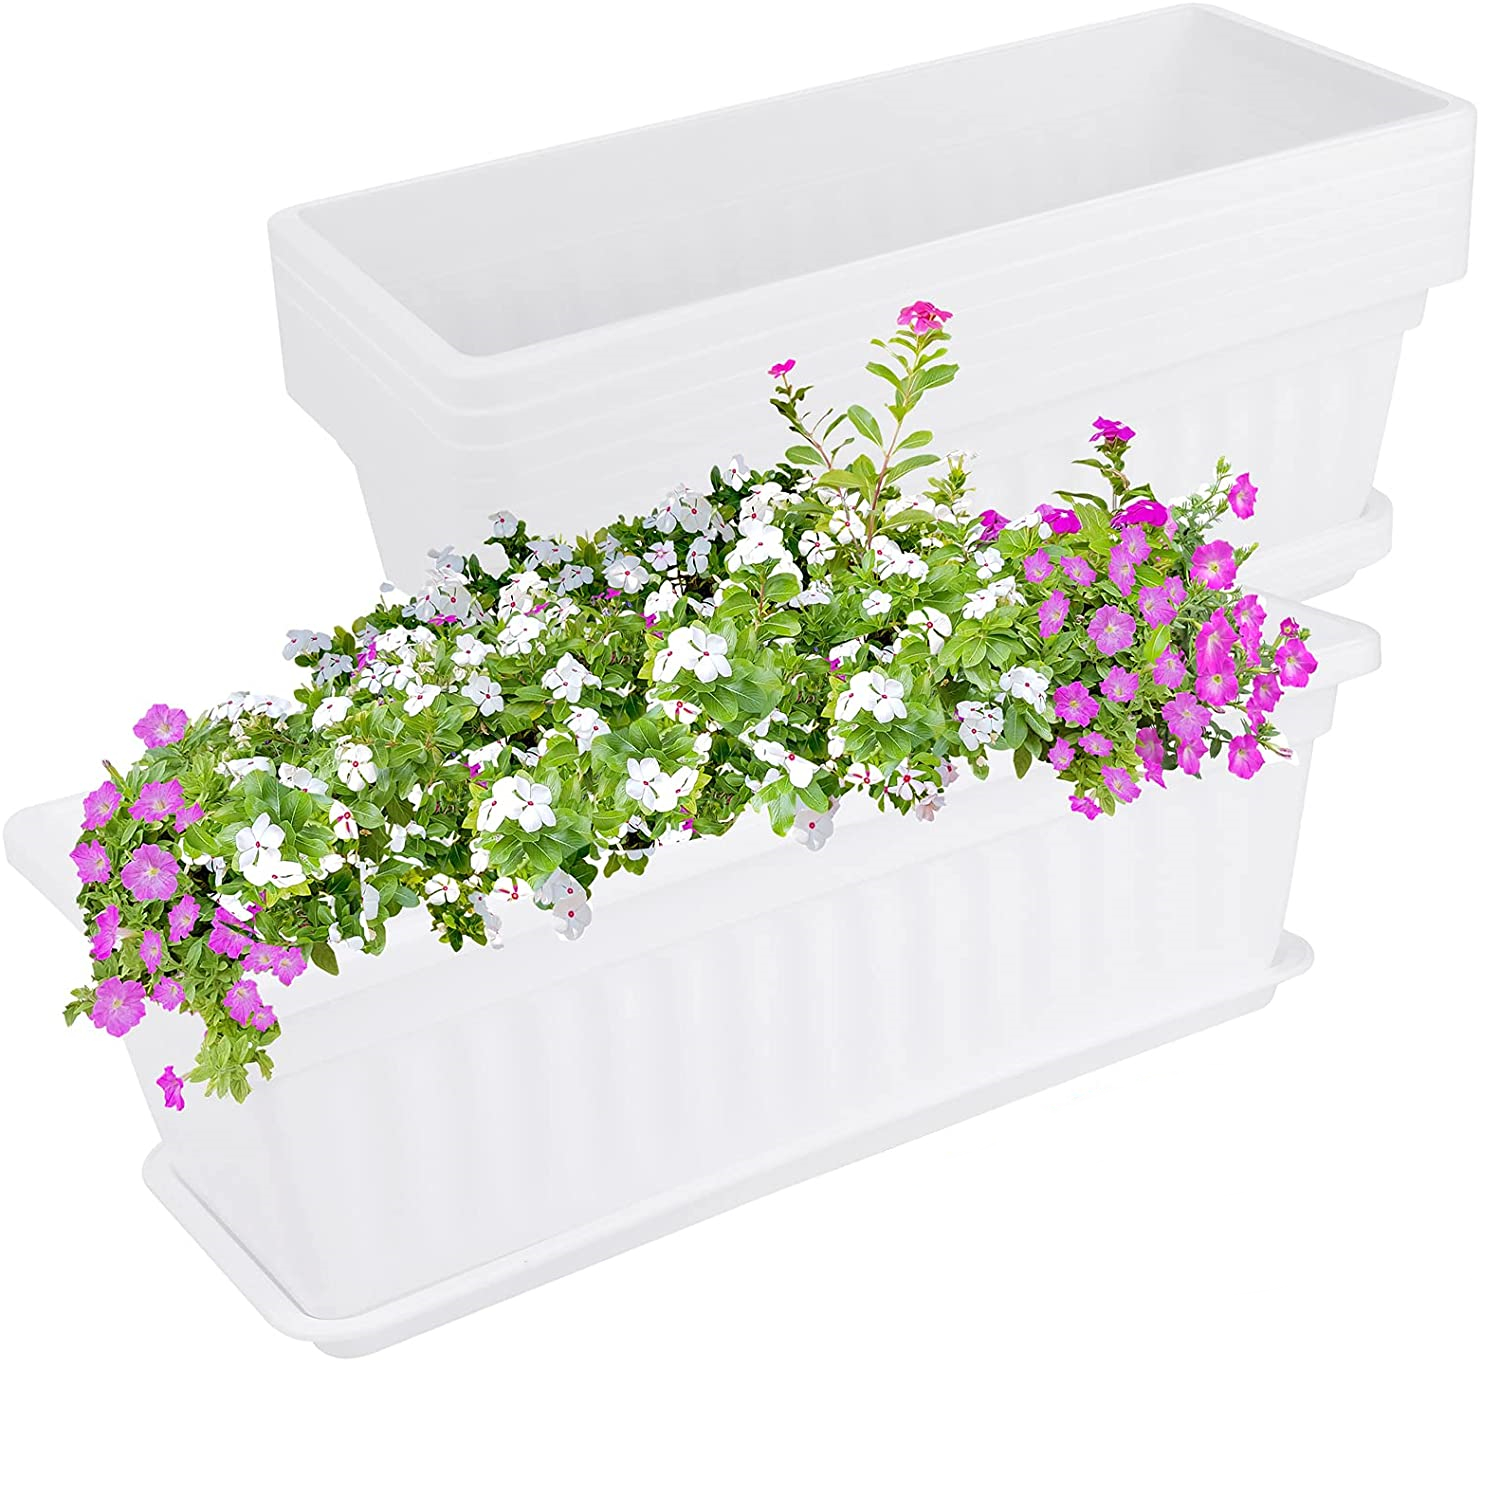 Triani 17 inch Rectangular Plastic Thicken Planters with Trays - Window Planter Box for Outdoor and Indoor Herbs, Vegetables, Flowers and Succulent Plants (1 Pack White) - image 2 of 8